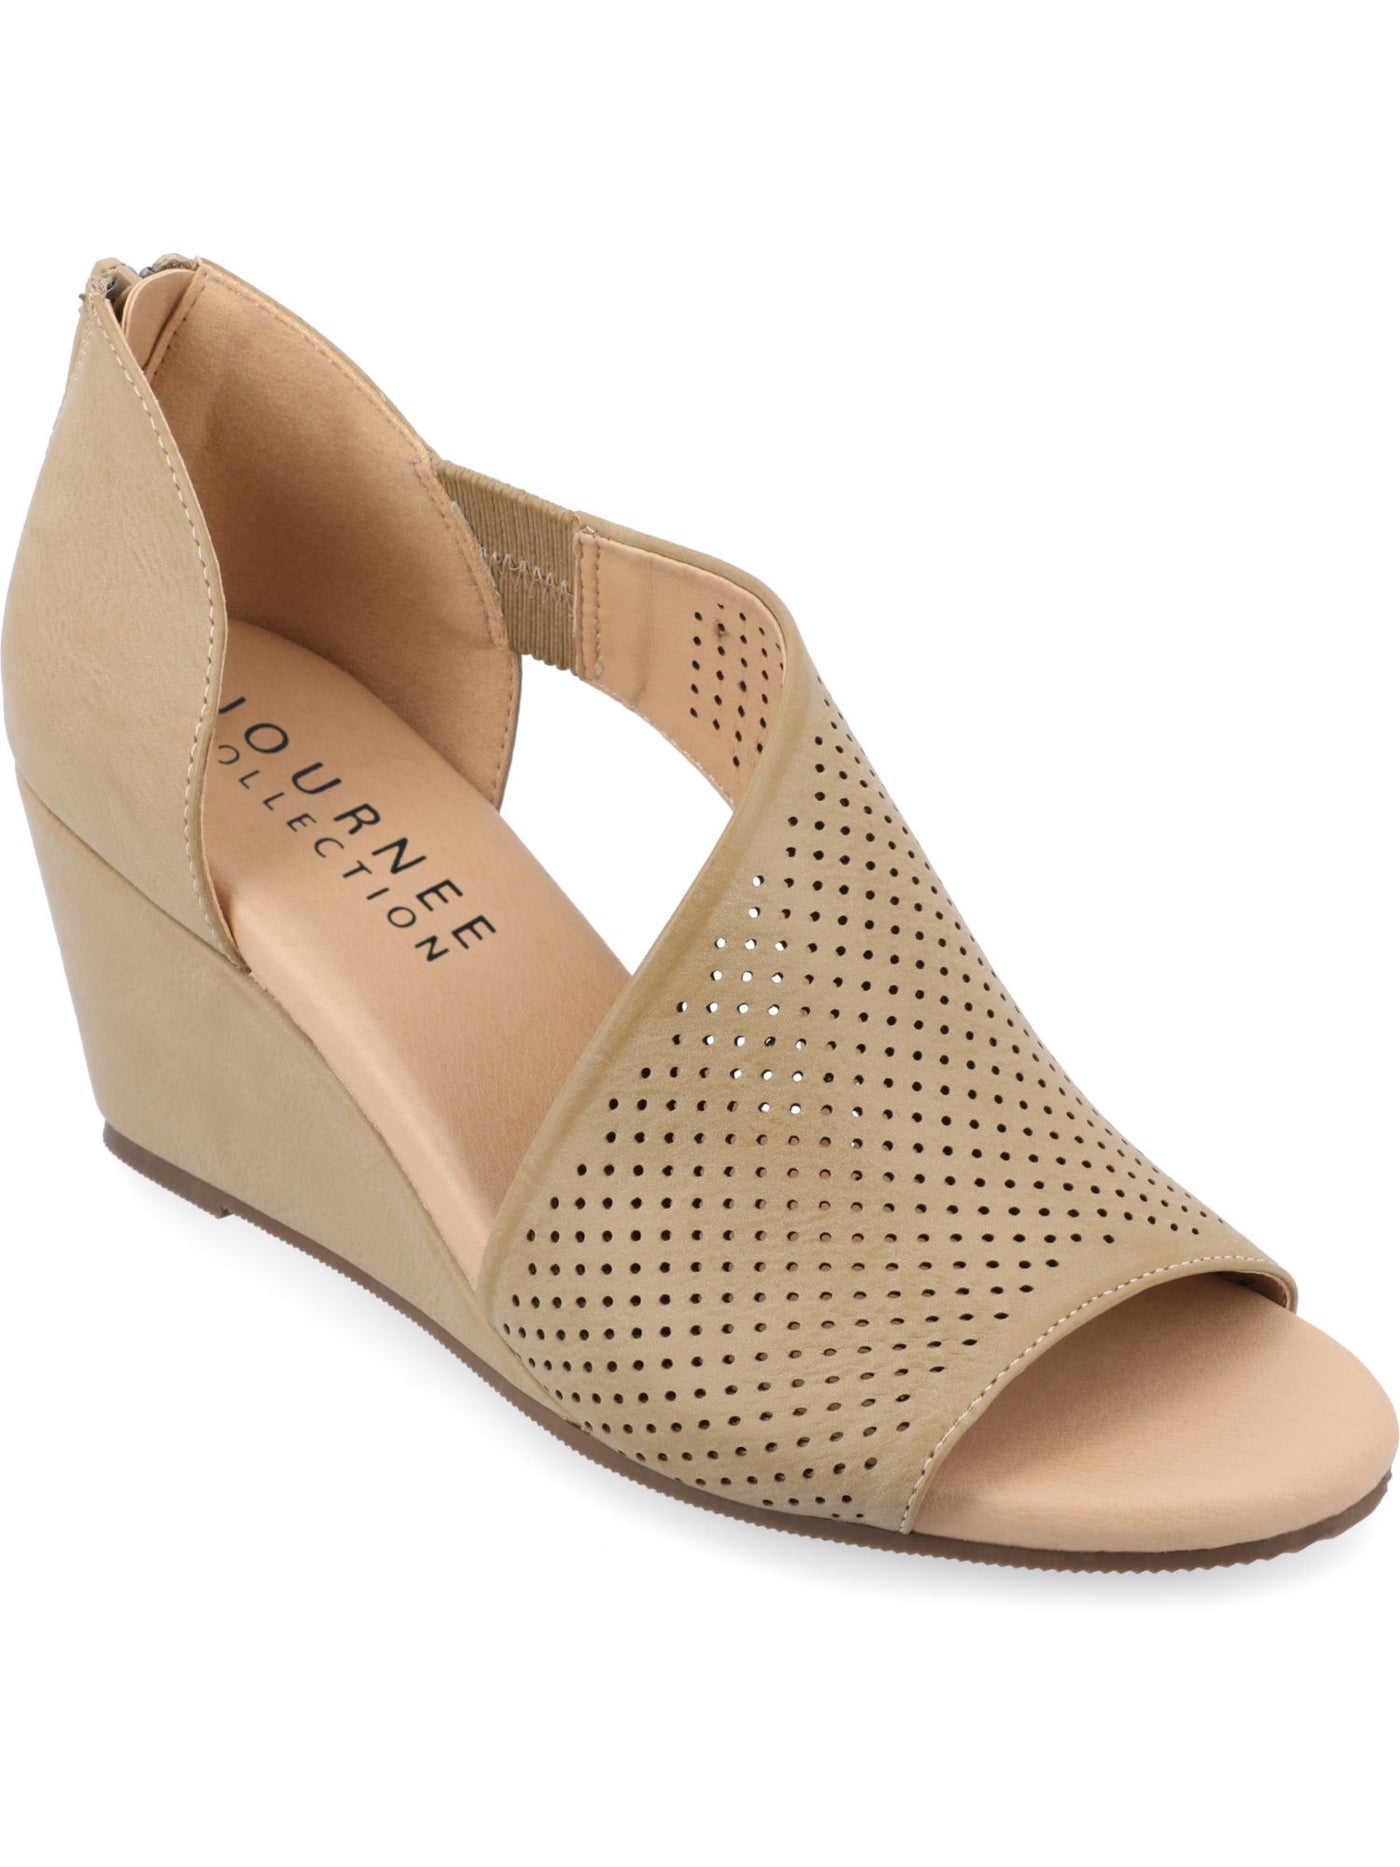 JOURNEE COLLECTION Womens Beige Goring Cushioned Perforated D Orsay Aretha Open Toe Wedge Zip-Up Heeled Sandal 8 W